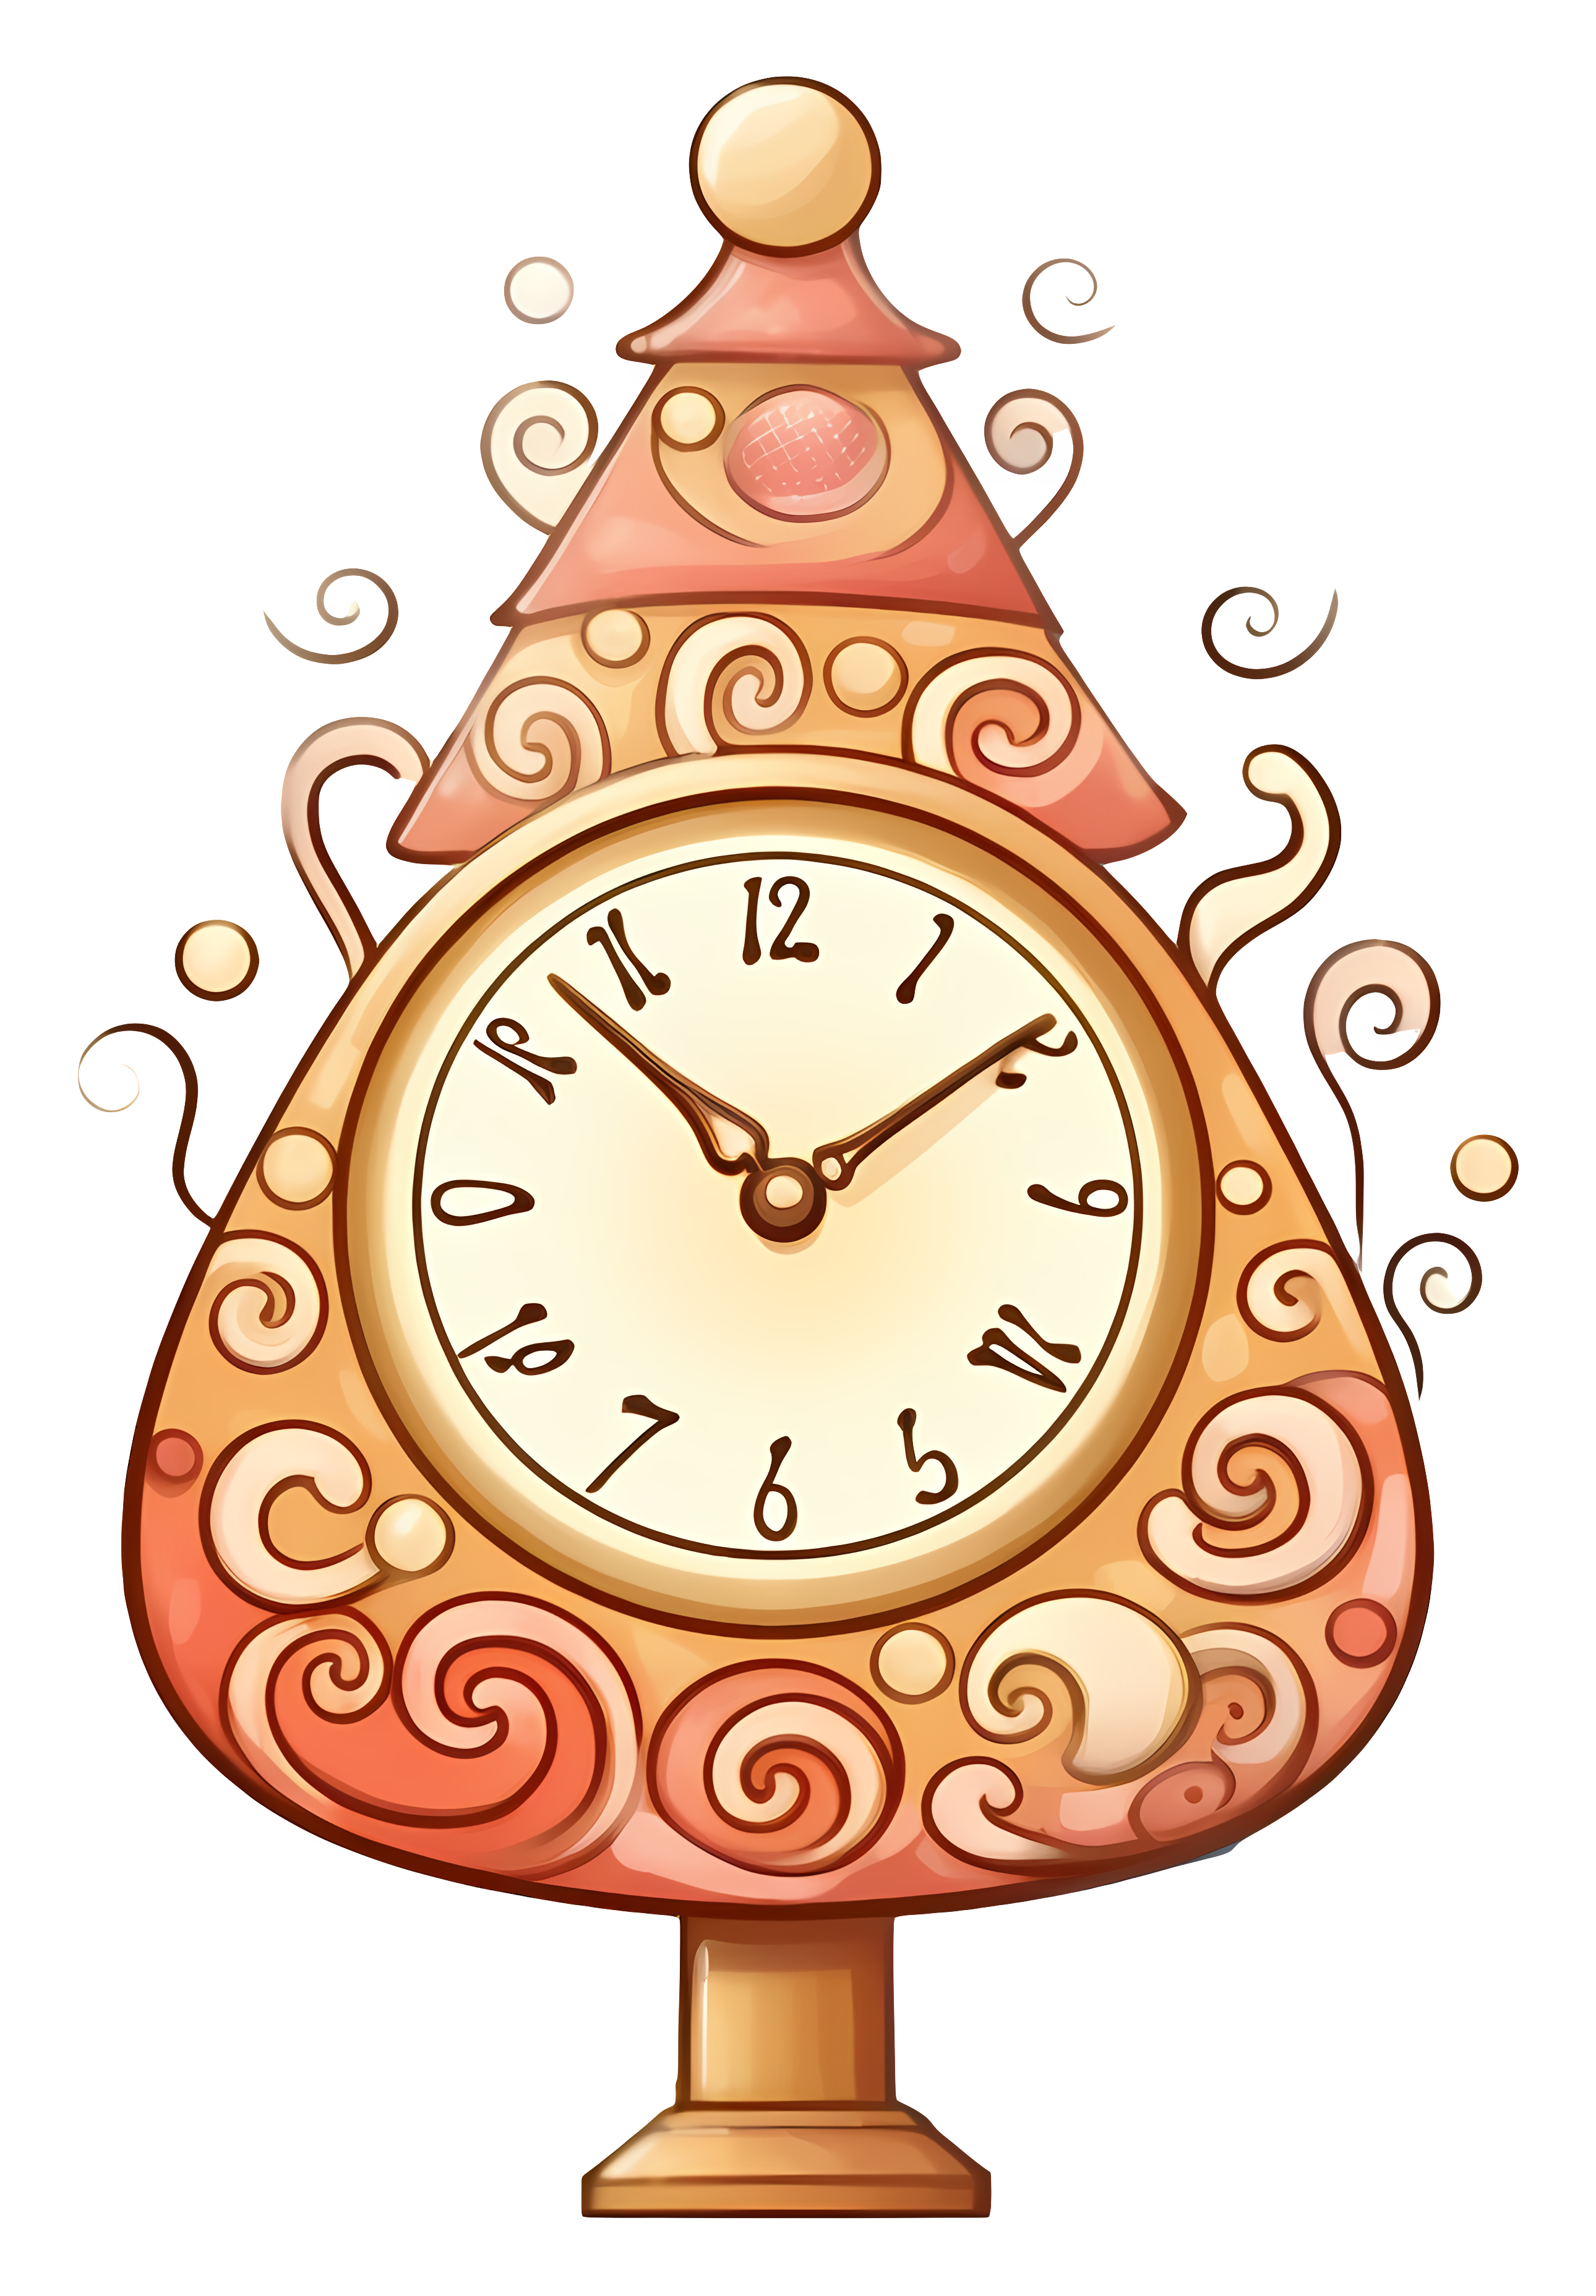 Ornate clock with intricate scrollwork in good condition Clipart